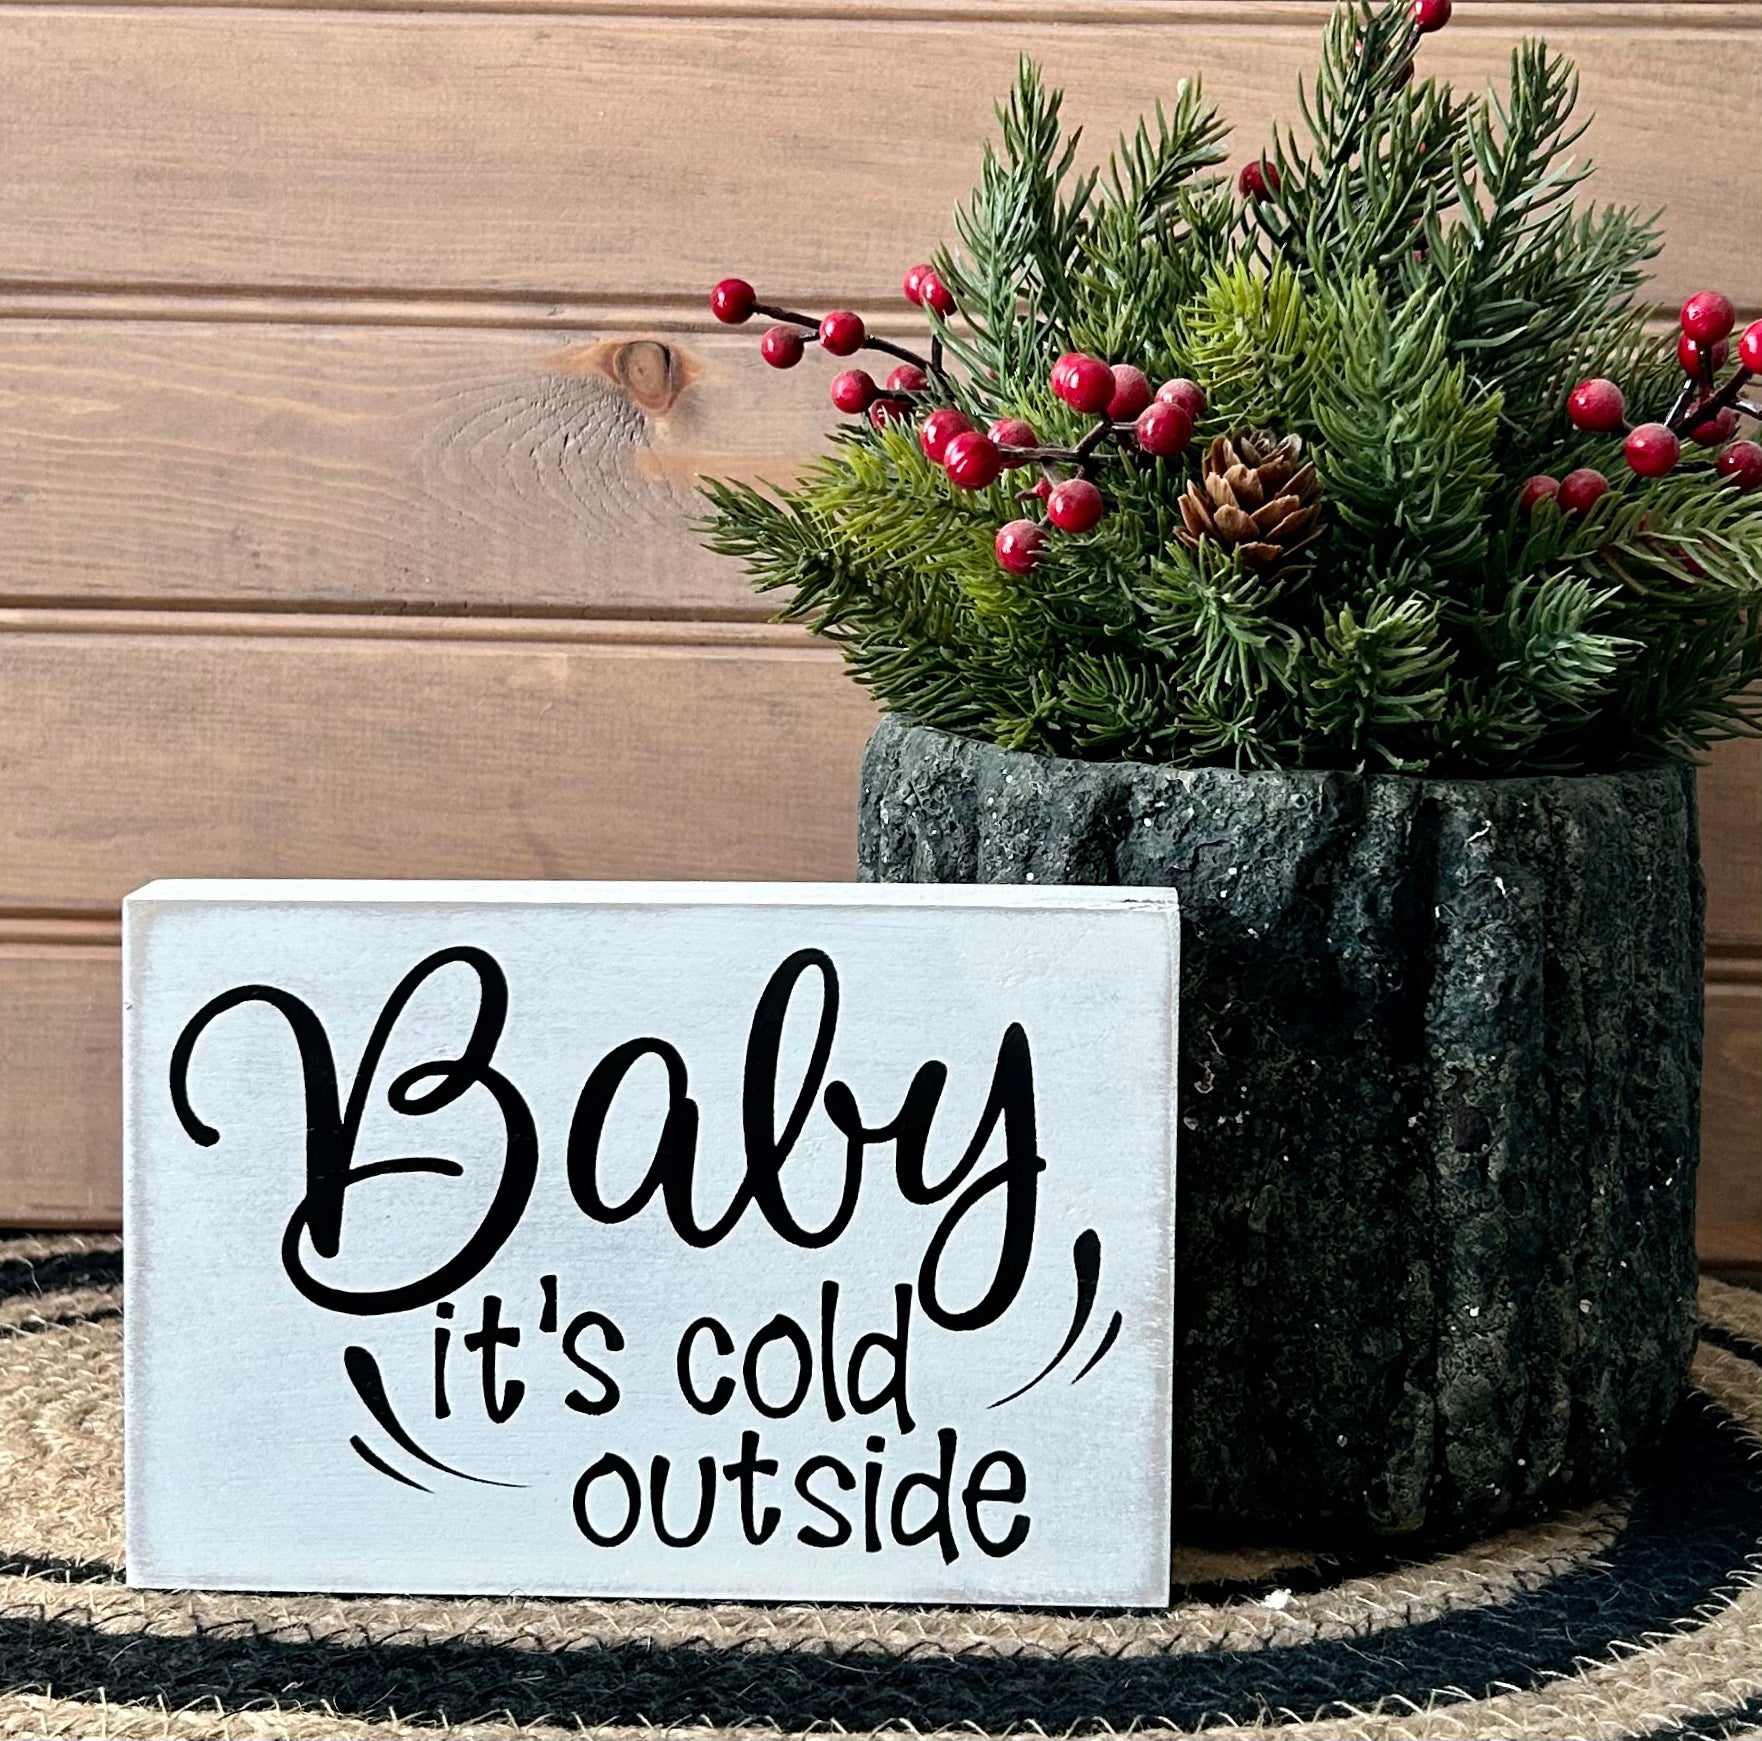 "Cold outside" wood sign